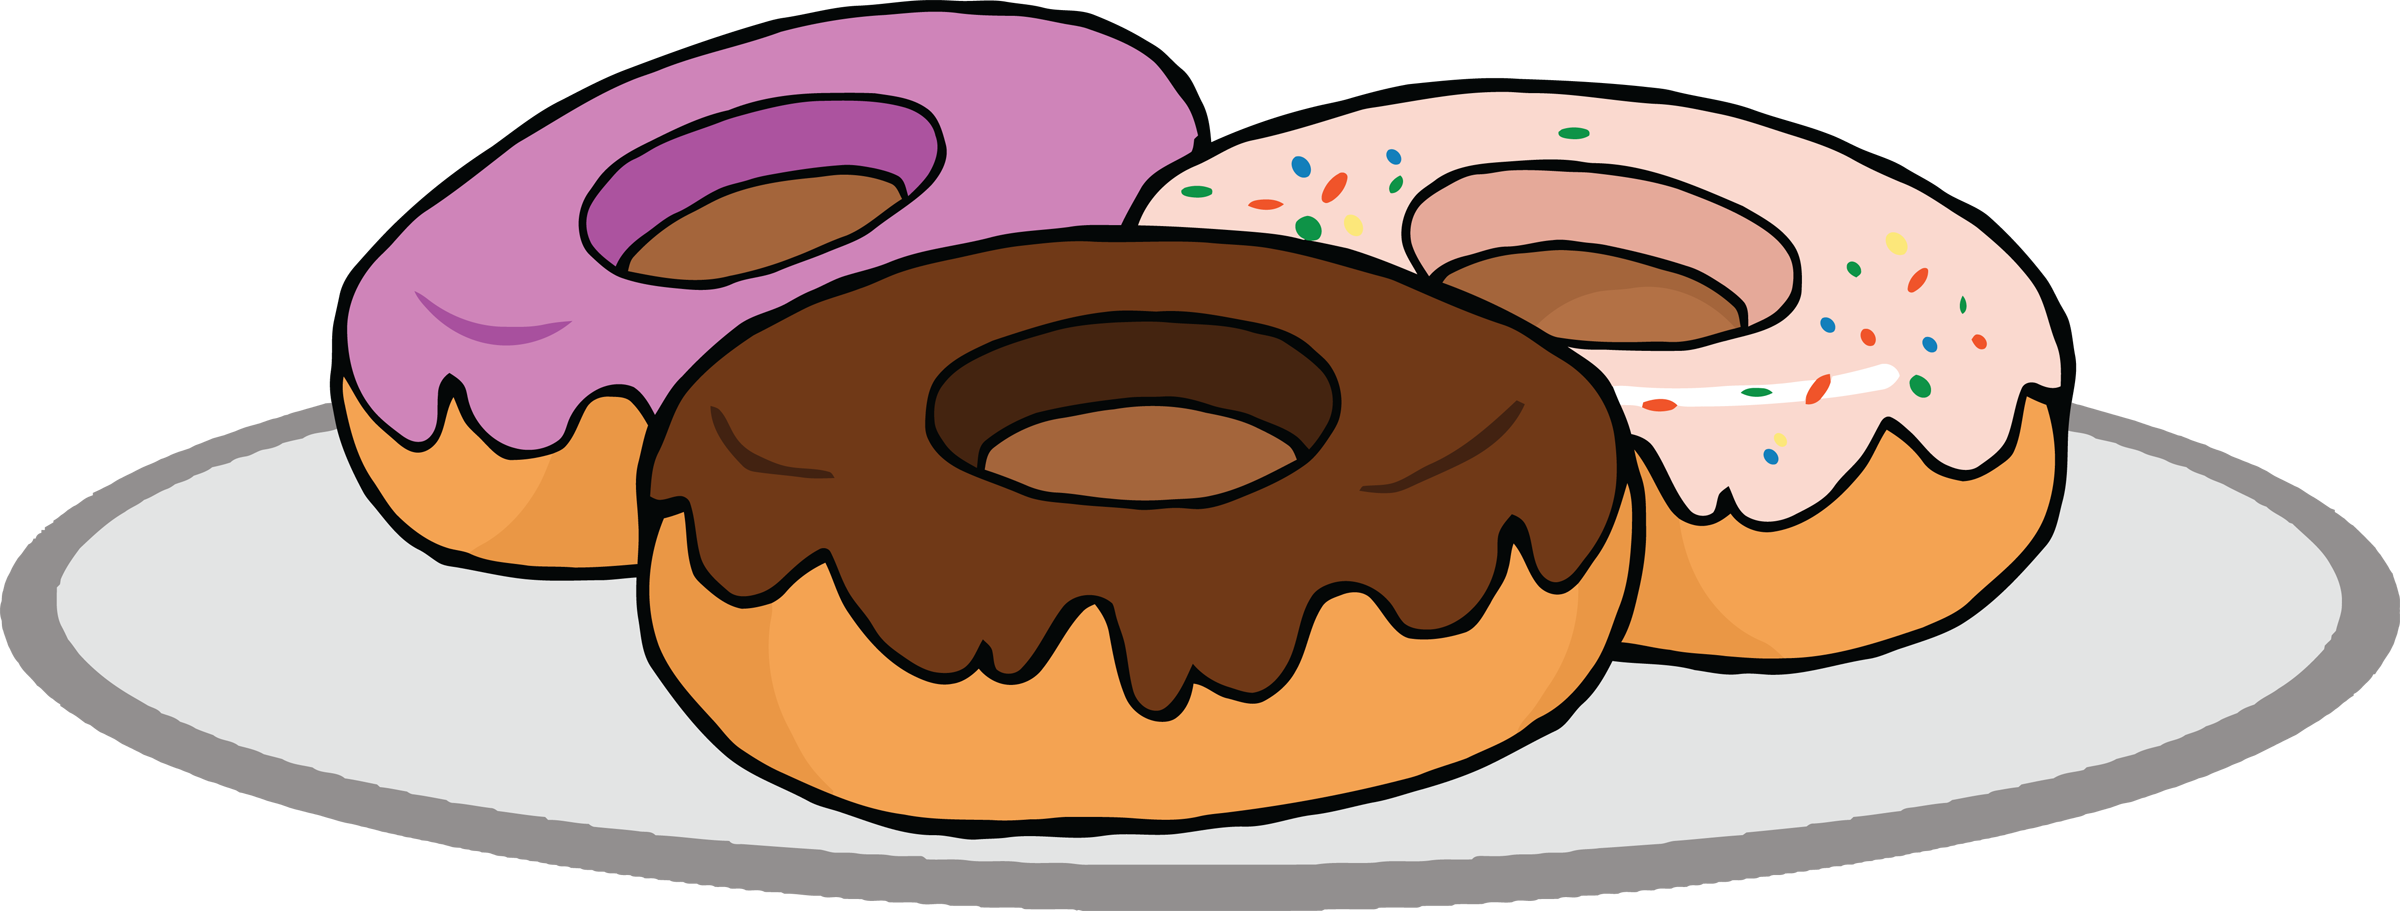 Clip Art Hoard: Donuts... or 